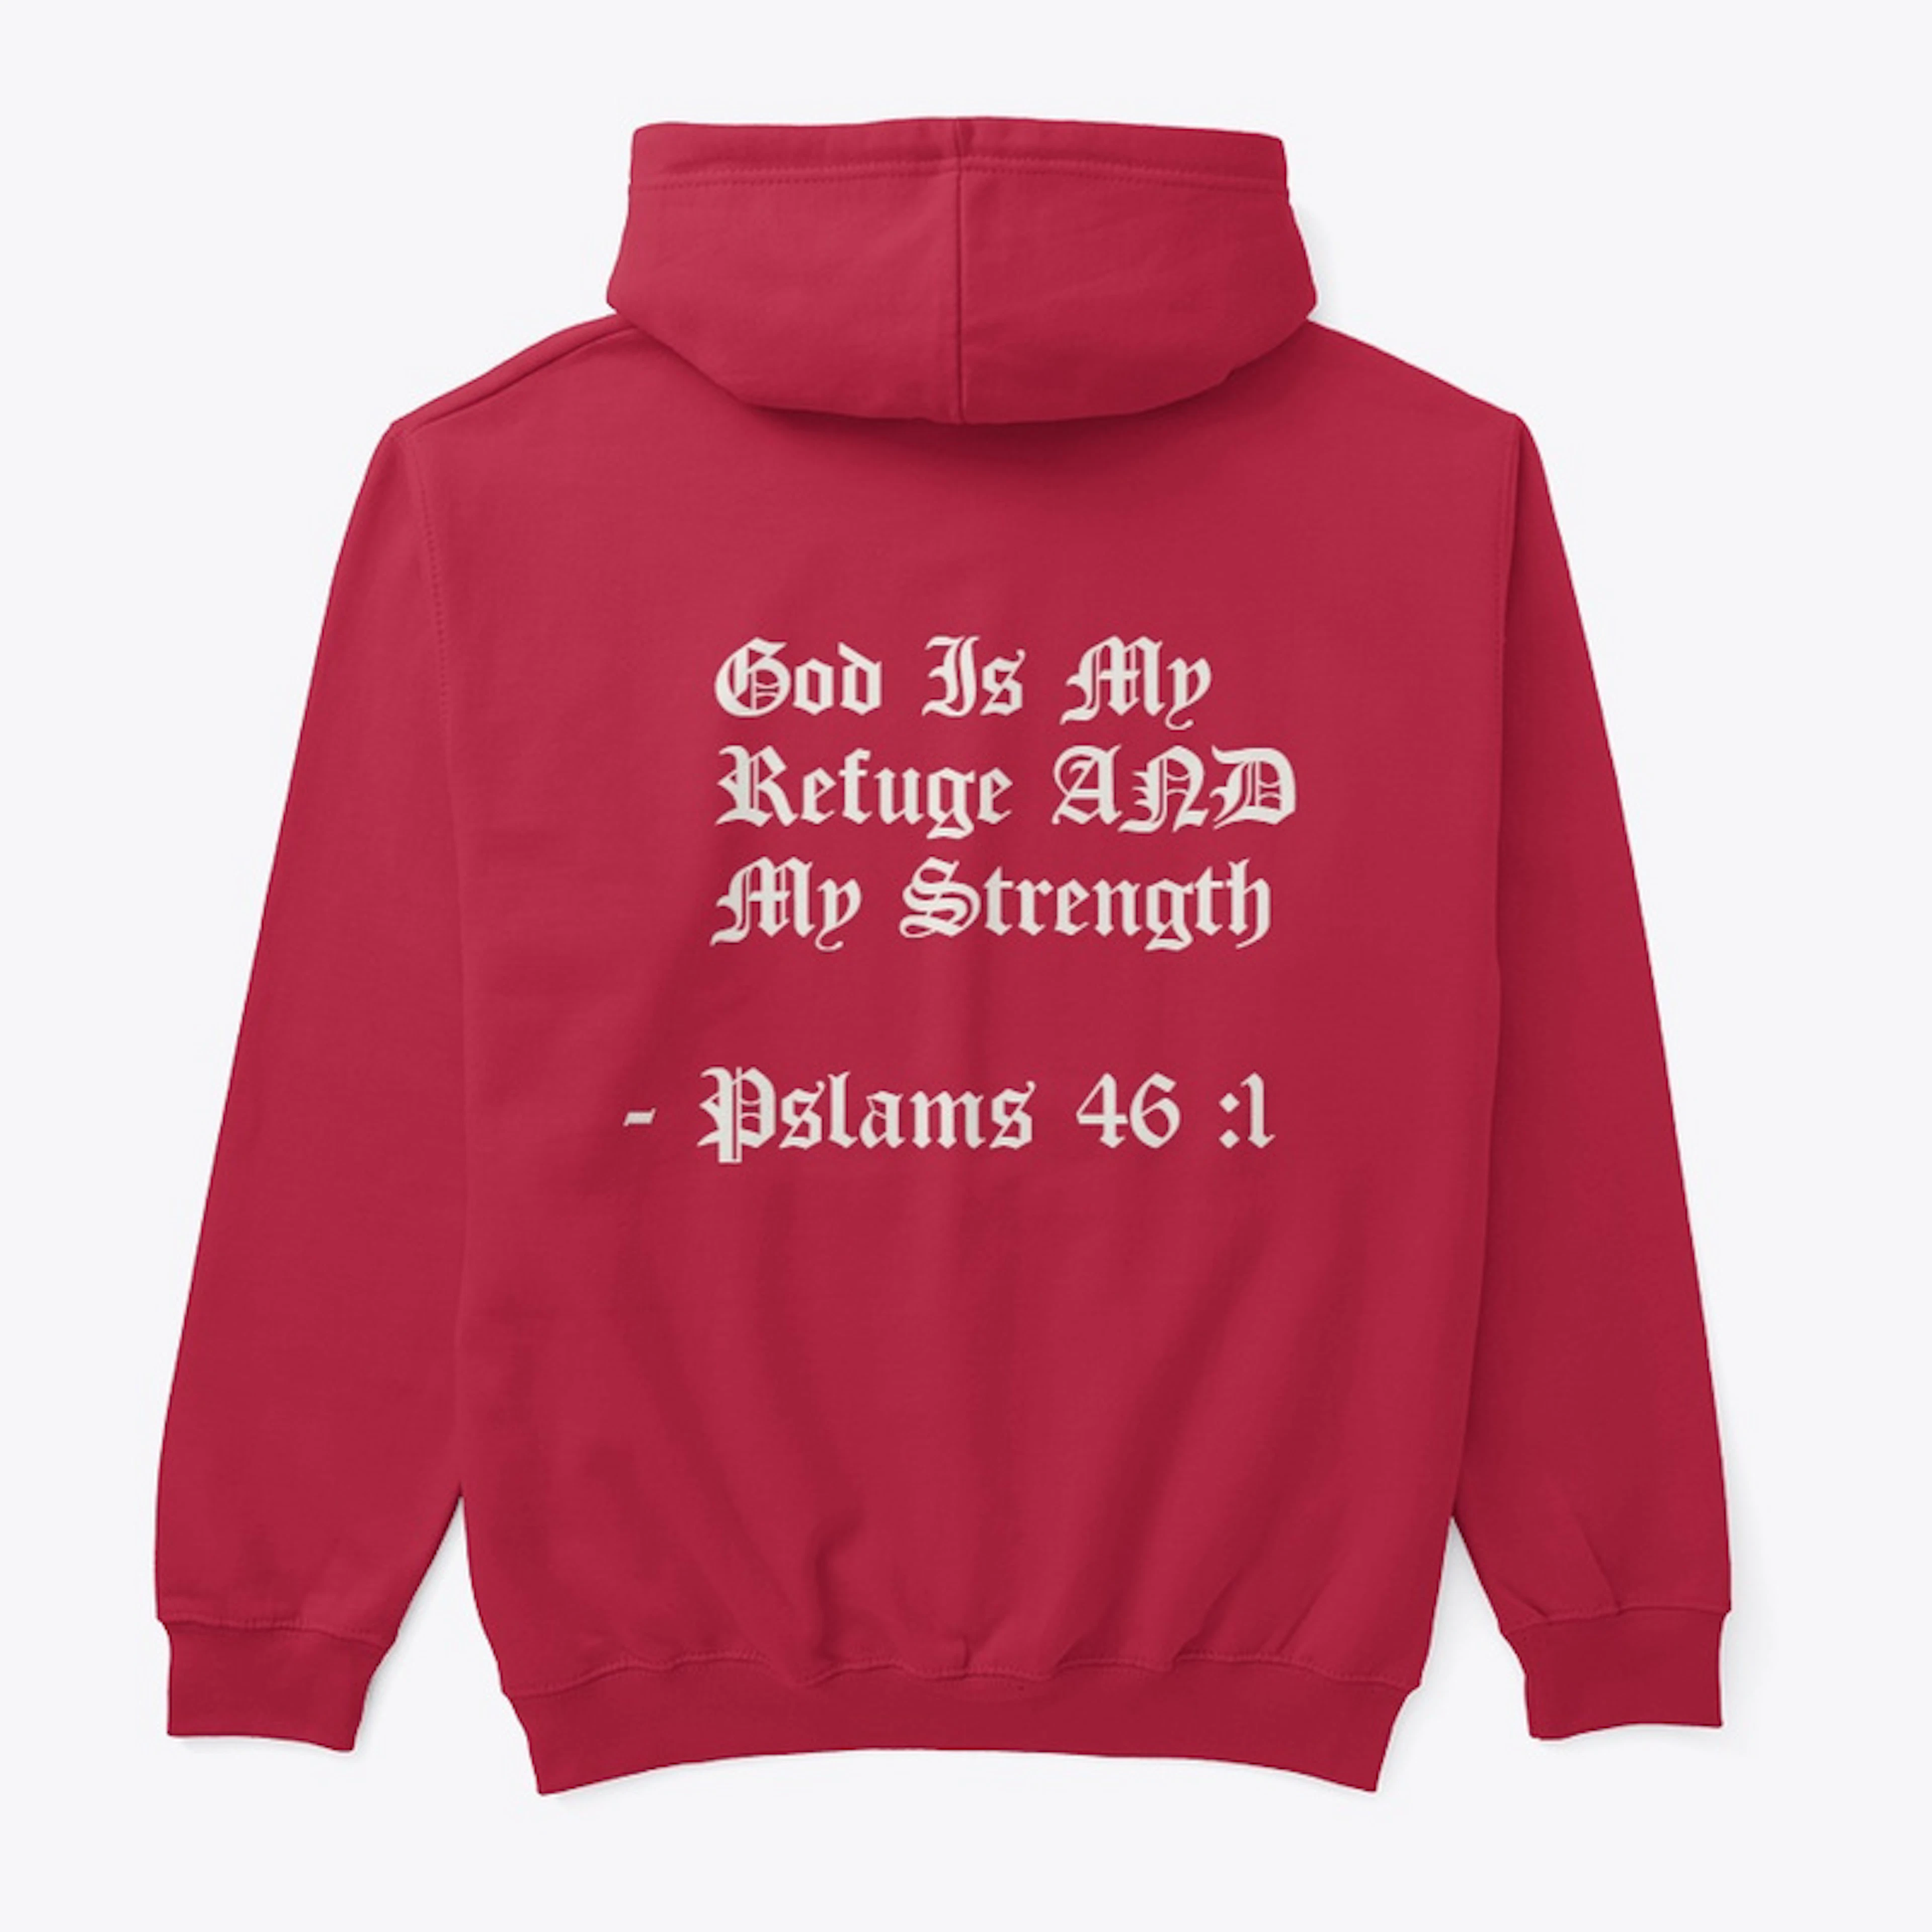 Psalms 46: 1 Classic Pullover Hoodie